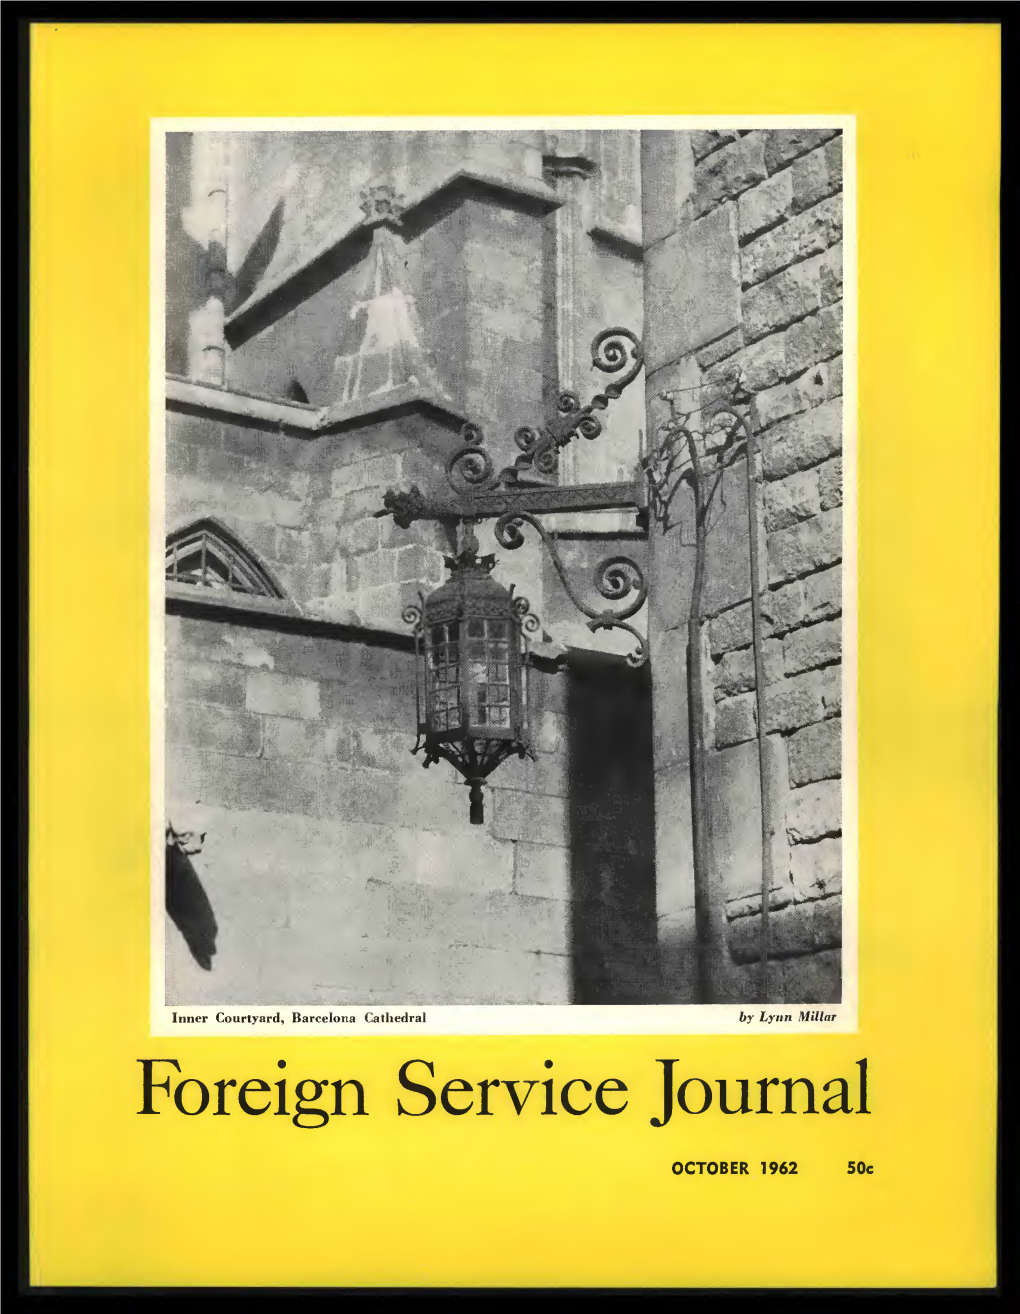 The Foreign Service Journal, October 1962